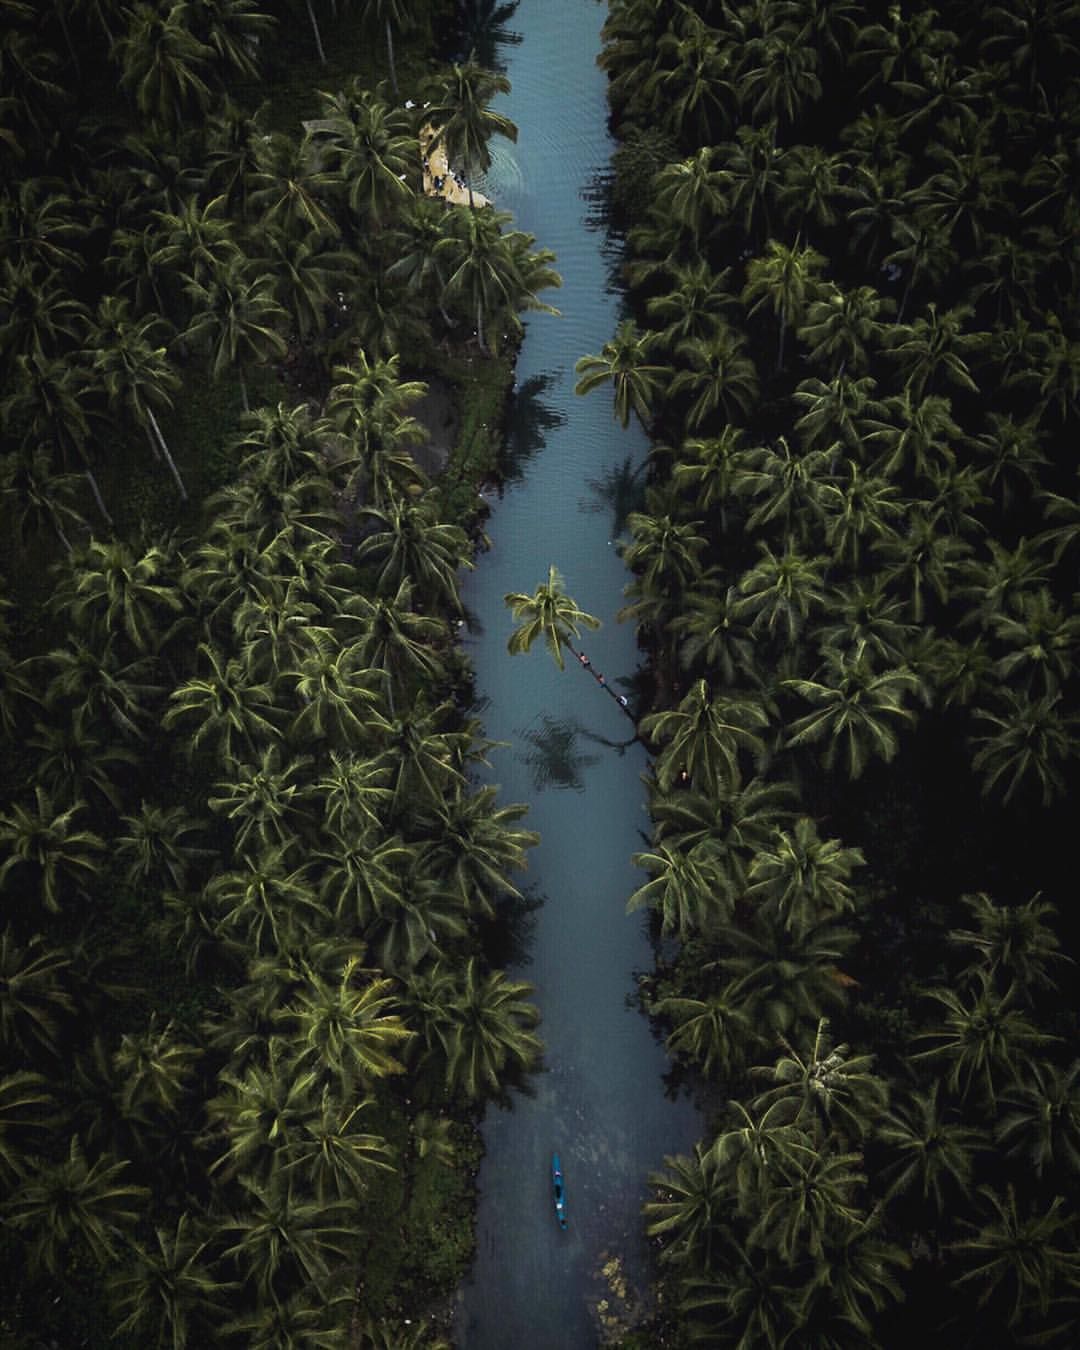 Southeast Asia From Above: Stunning Drone Photography by Ali Olfat